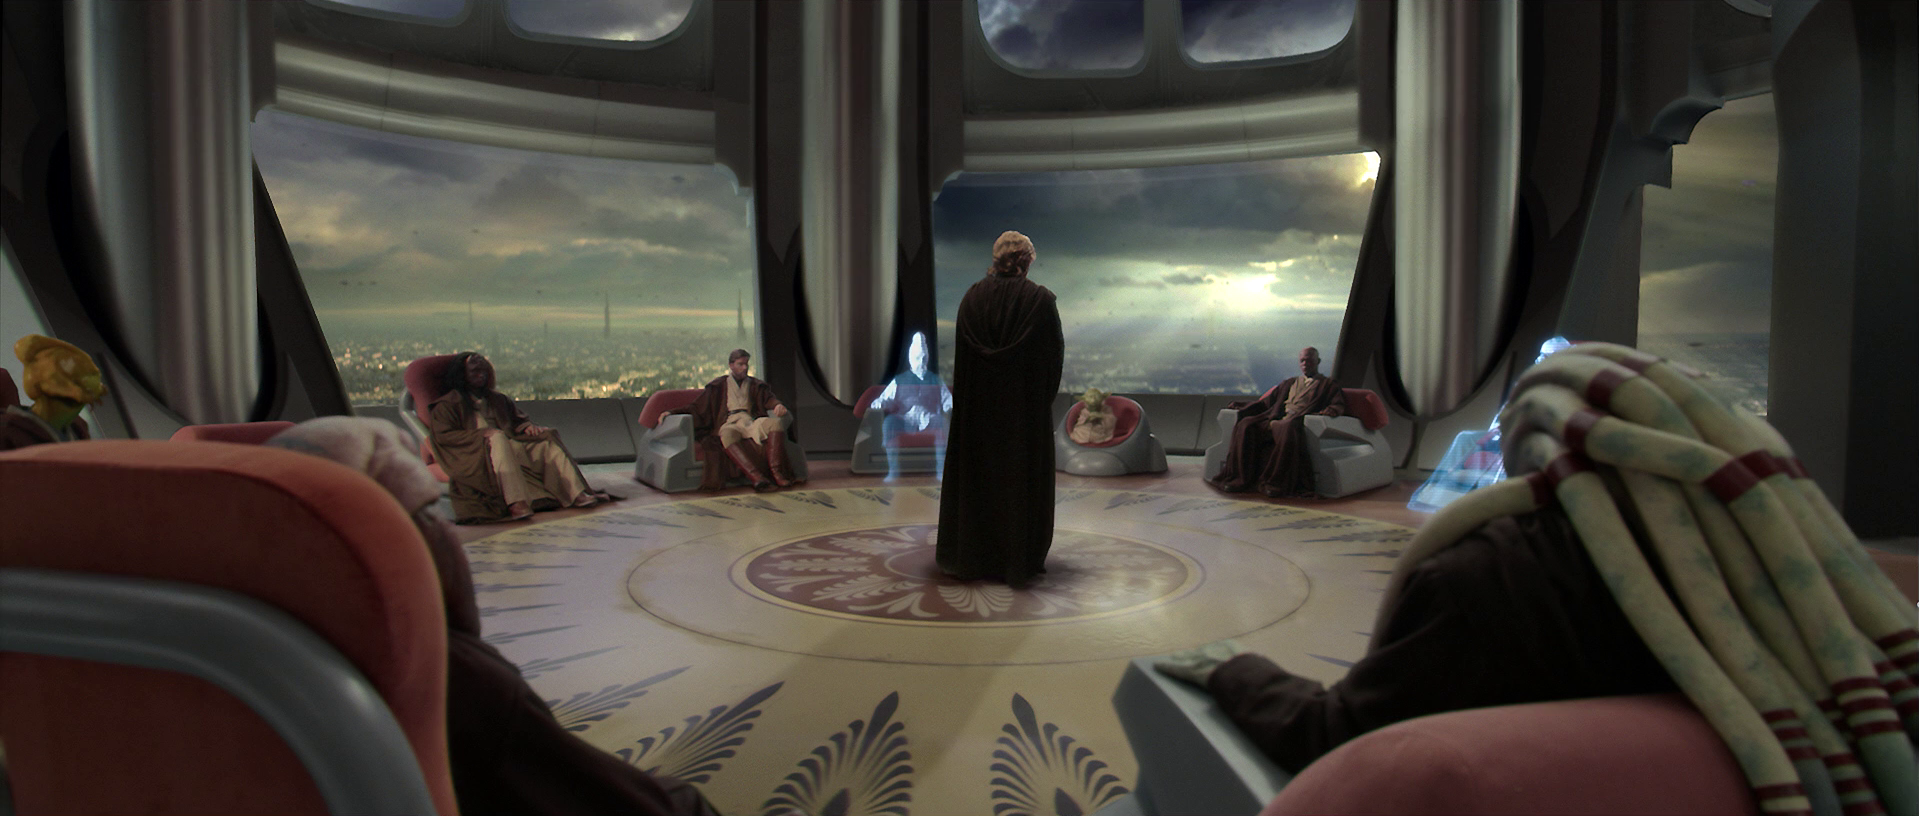 How many Jedi are in the Jedi council?